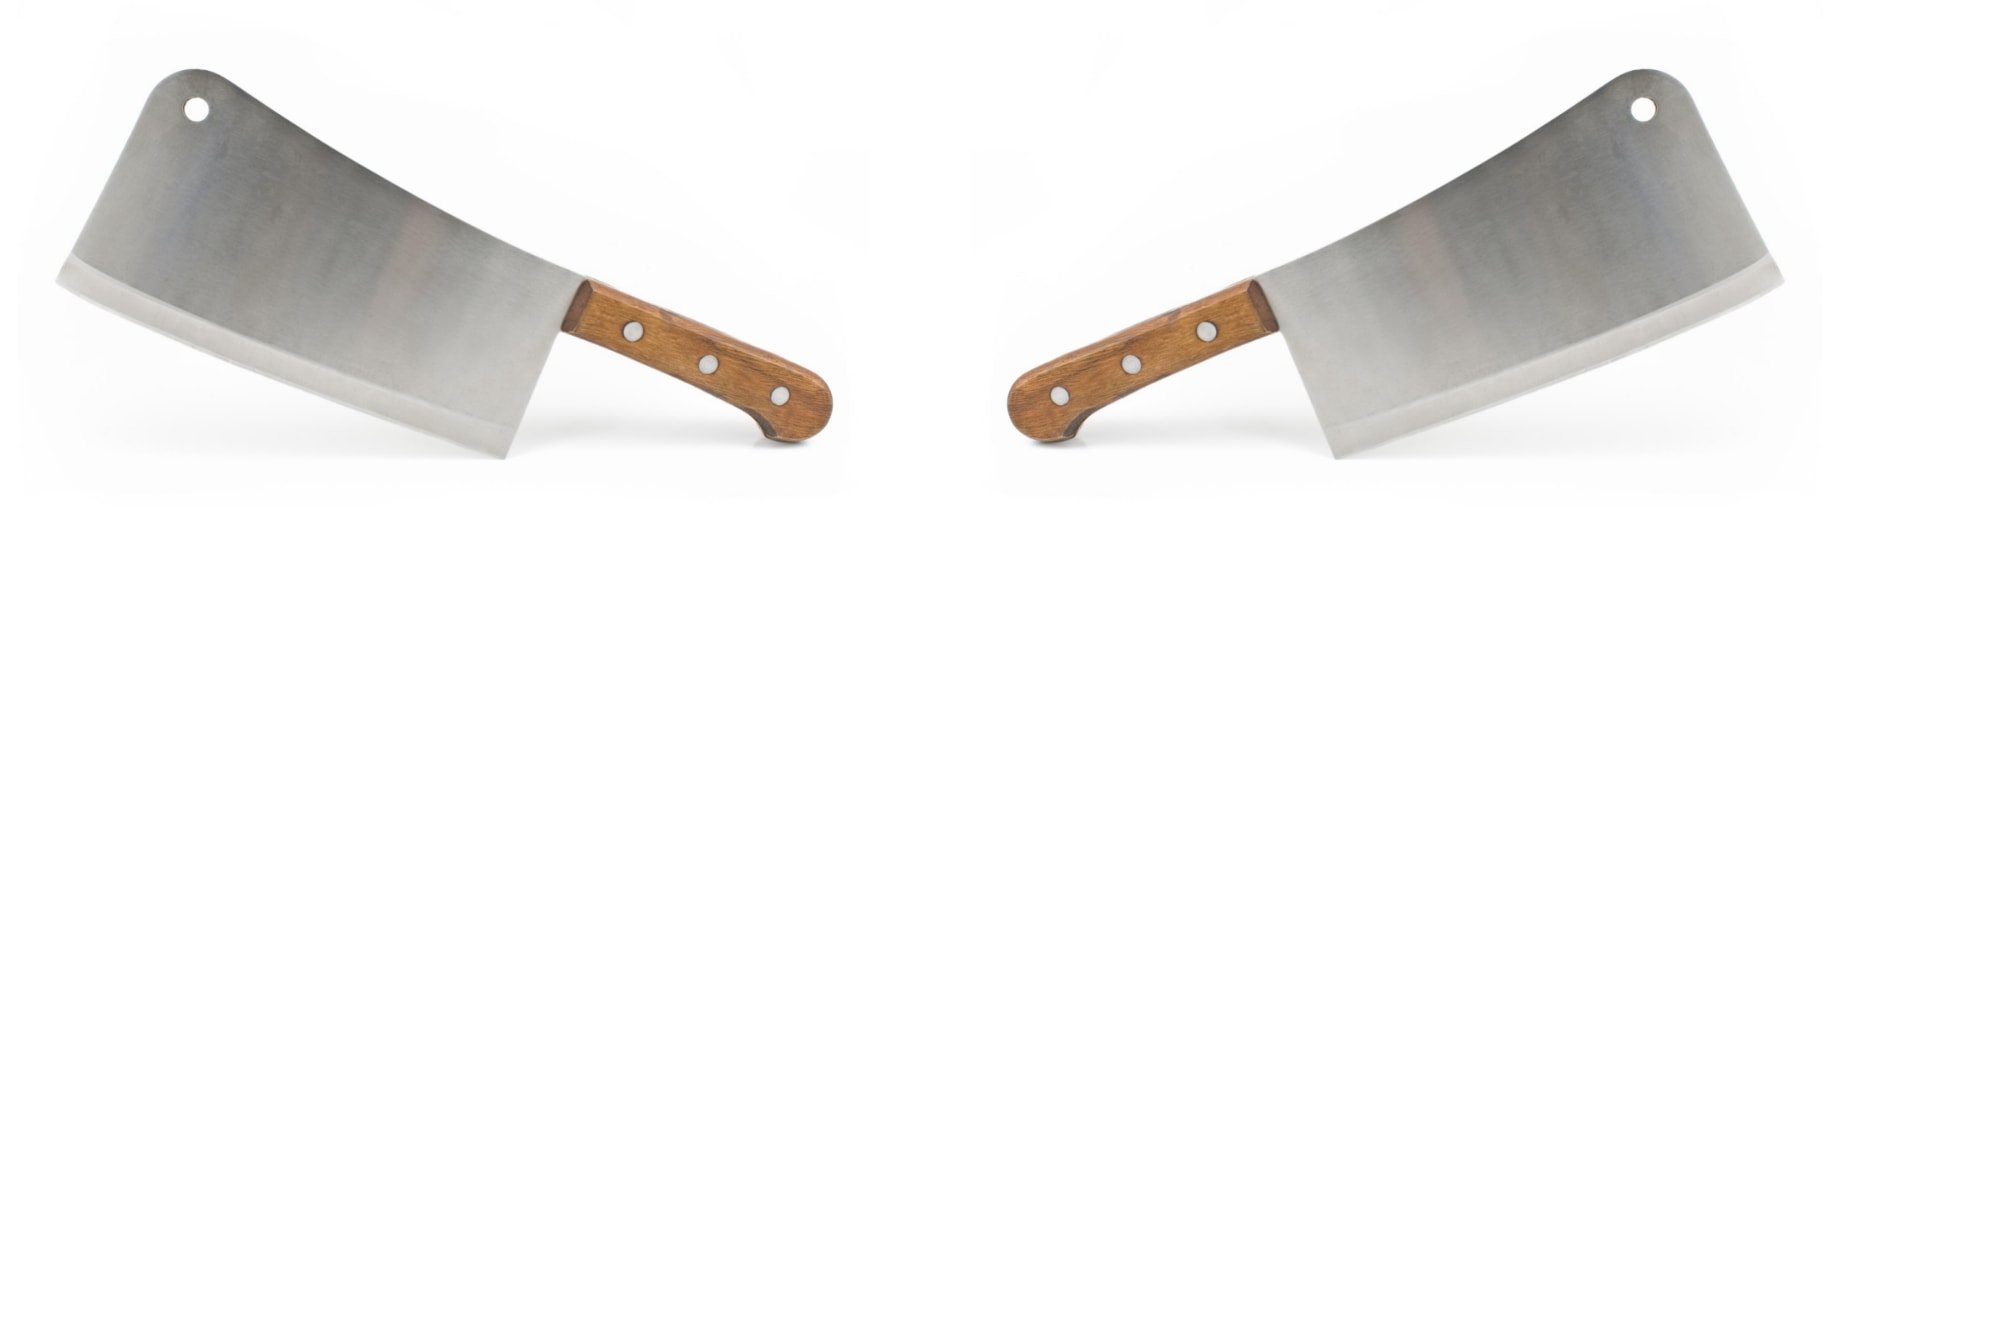 Two meat cleavers on a white background